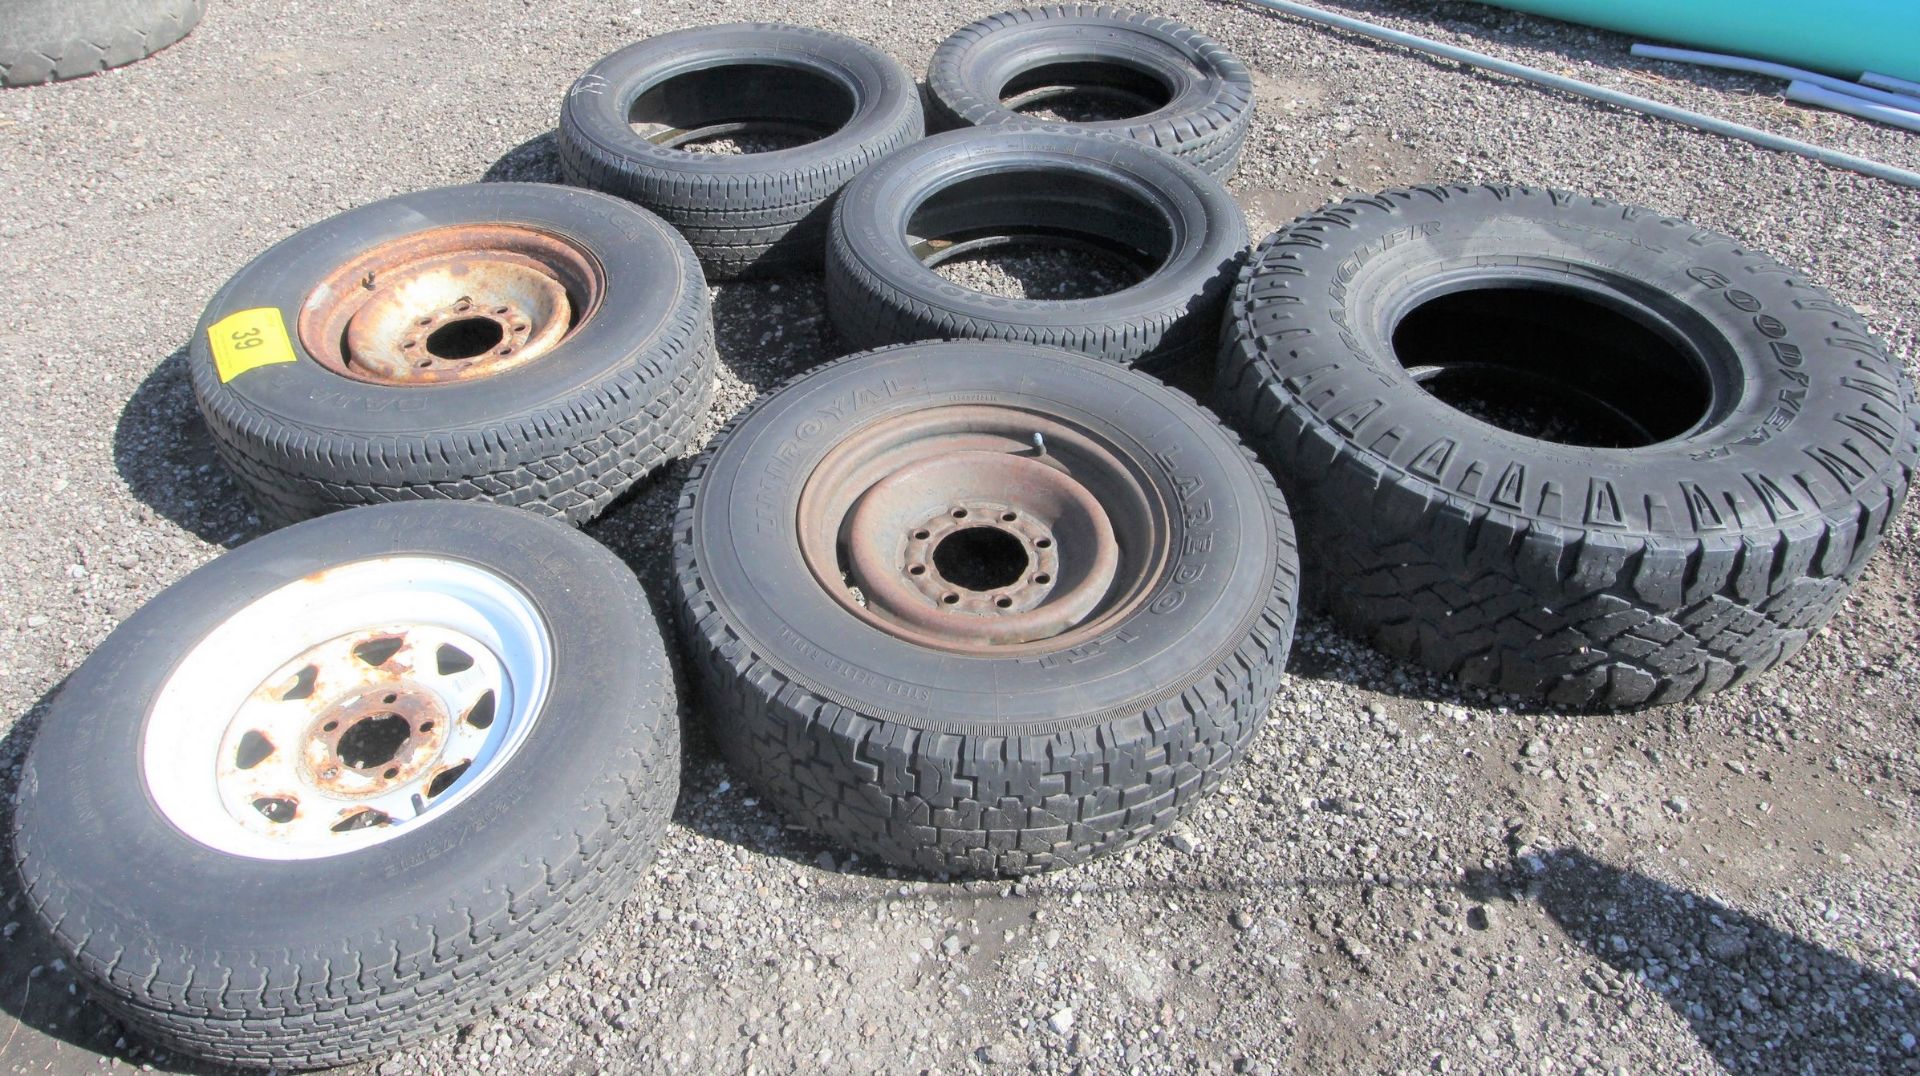 LOT OF (7) ASST. TIRES, SOME W/ RIMS - Image 2 of 2